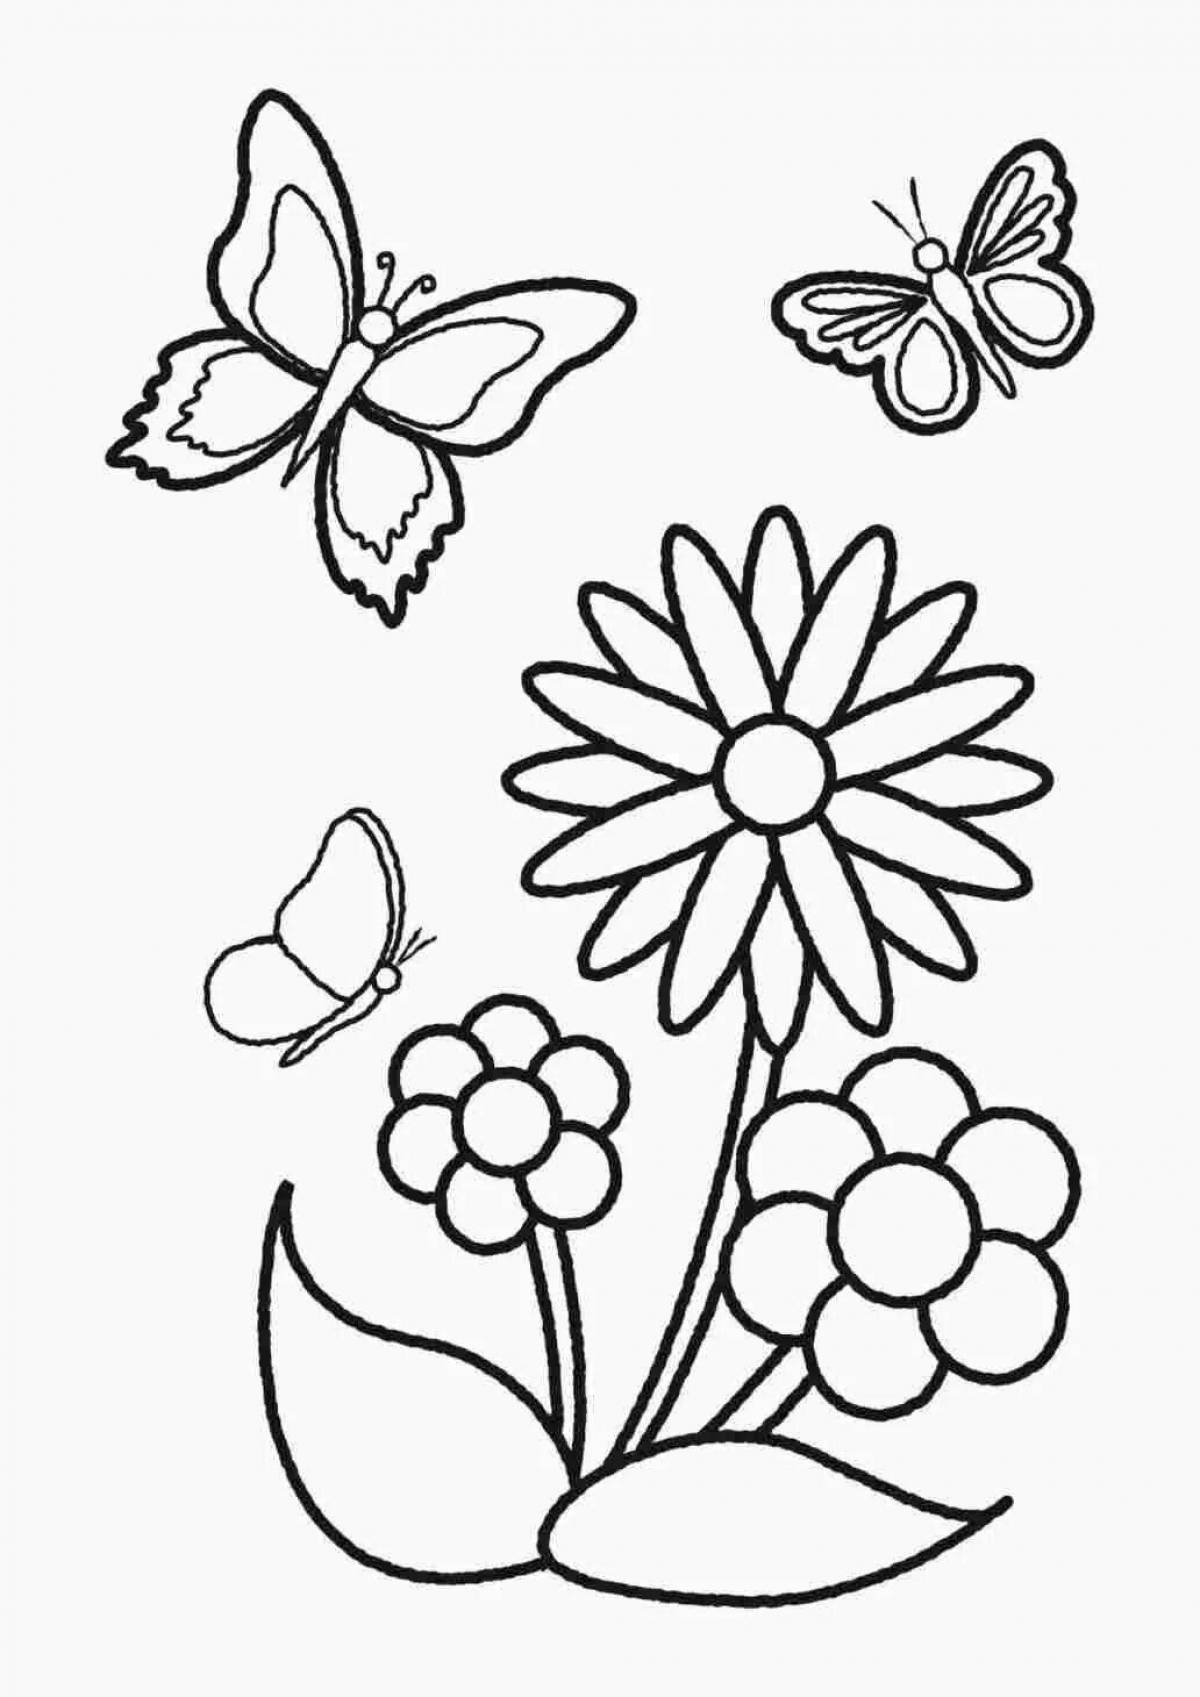 Colourful flowers coloring book for children 4-5 years old